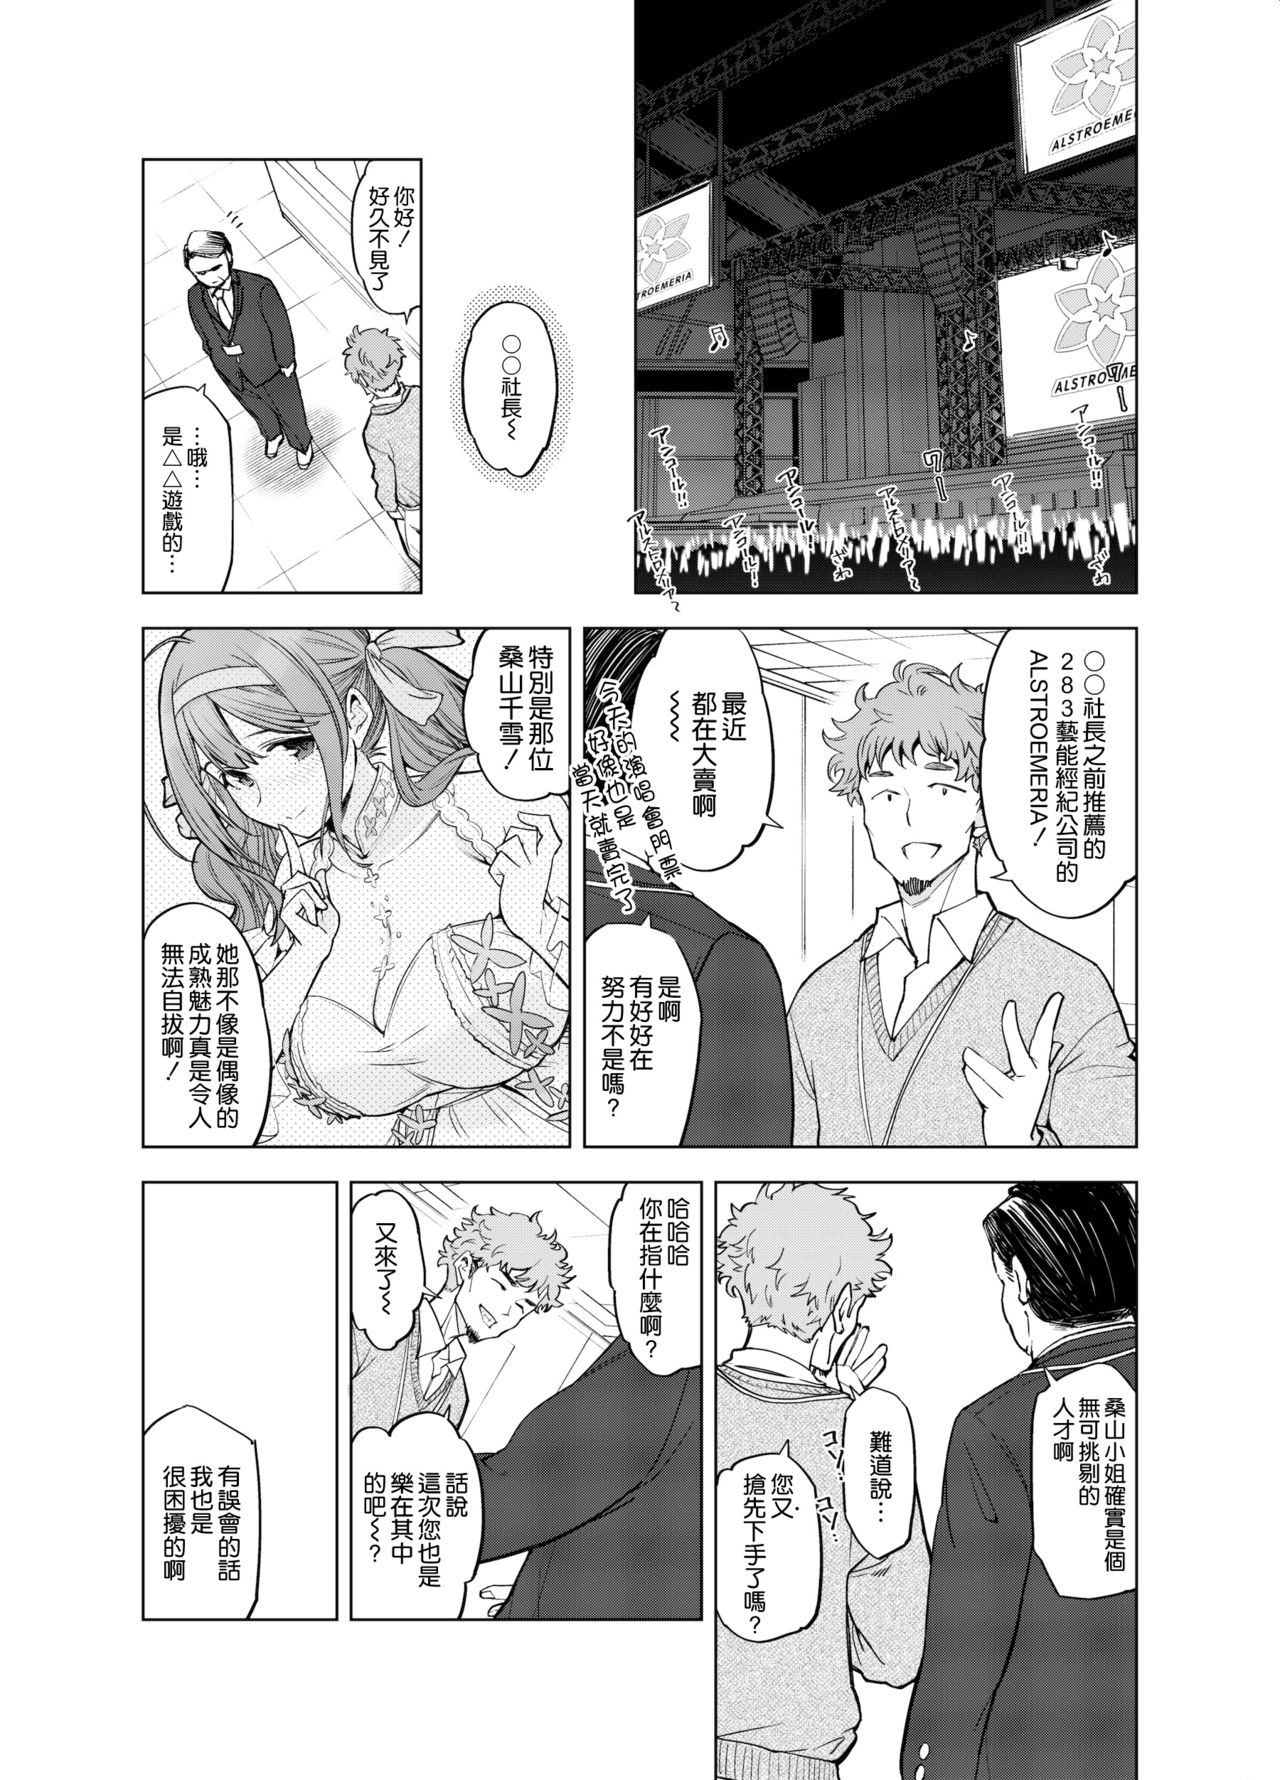 [SMUGGLER (Kazuwo Daisuke)] Late Night Blooming (THE iDOLM@STER: Shiny Colors) [Chinese] [空気系☆漢化] [Digital] page 47 full